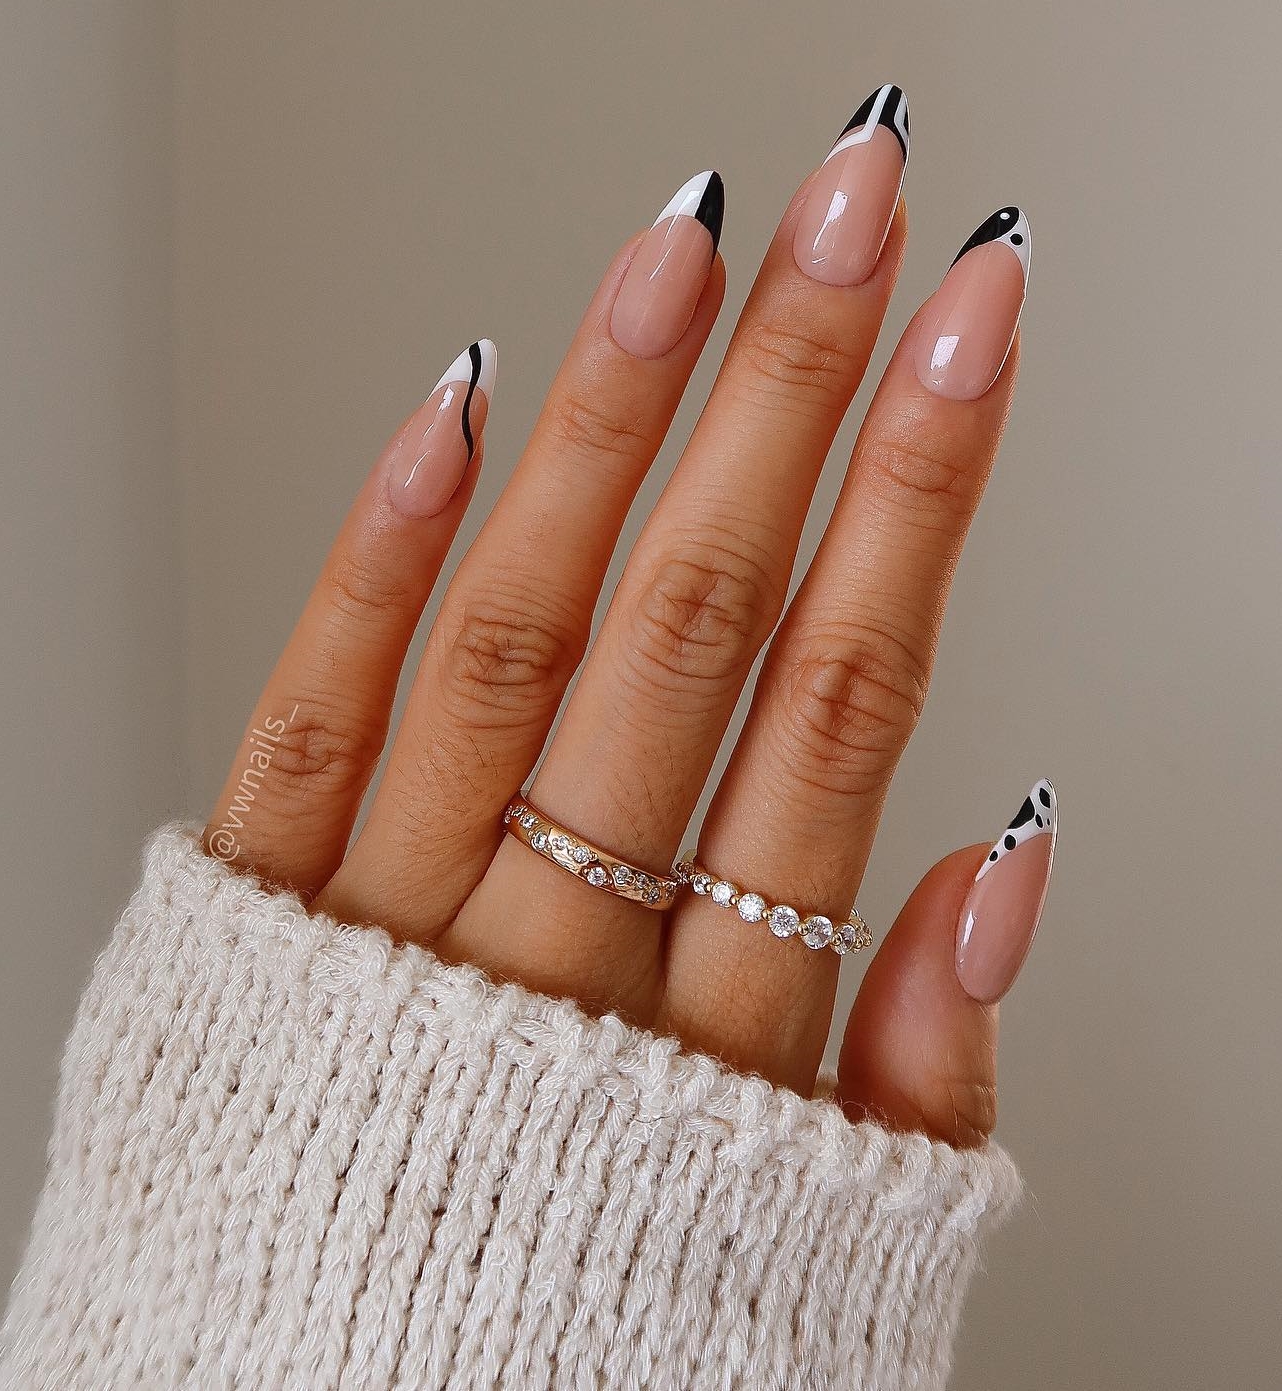 Long French Nails with Geometric Black and White Design